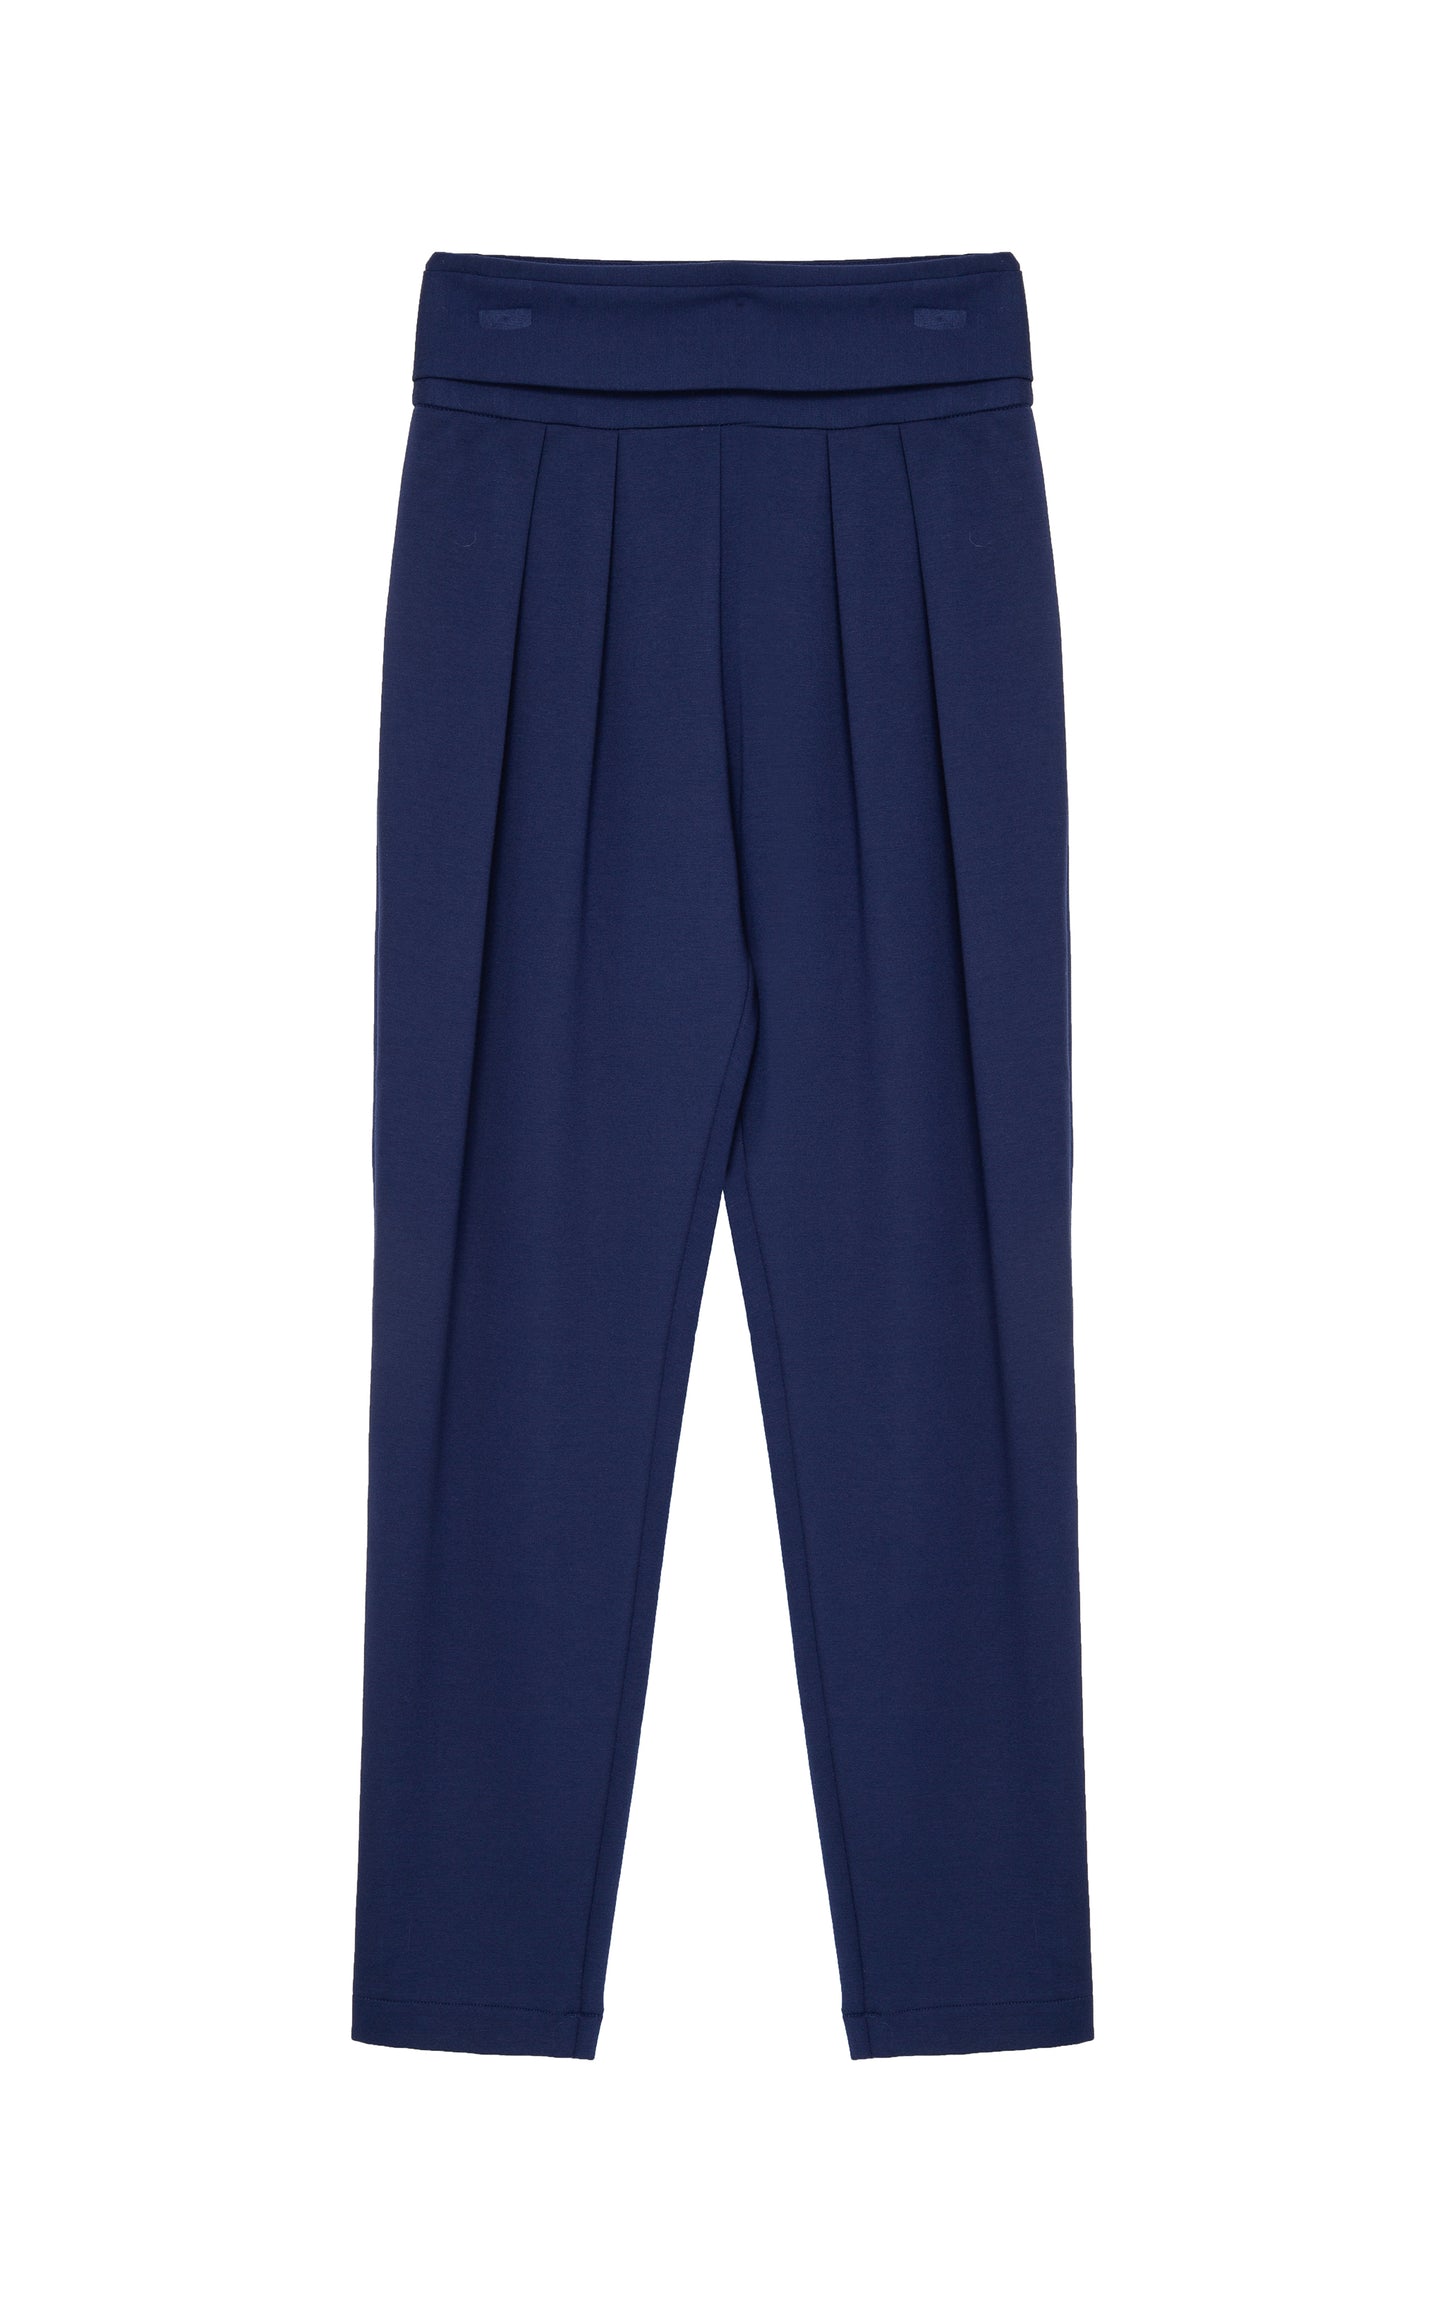 Front view of high-waisted navy fabric pant